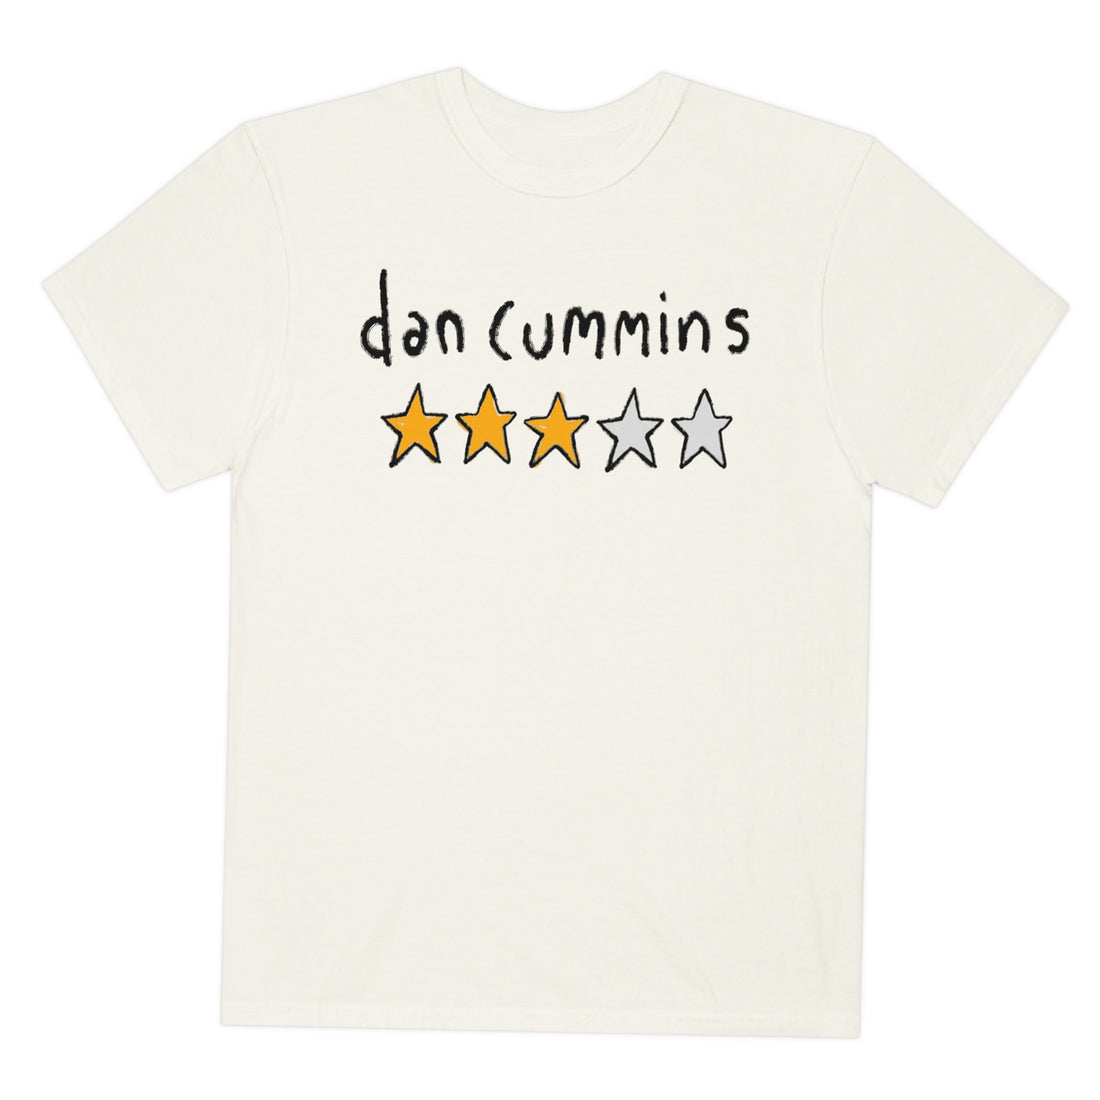 3 out of 5 Stars Tee